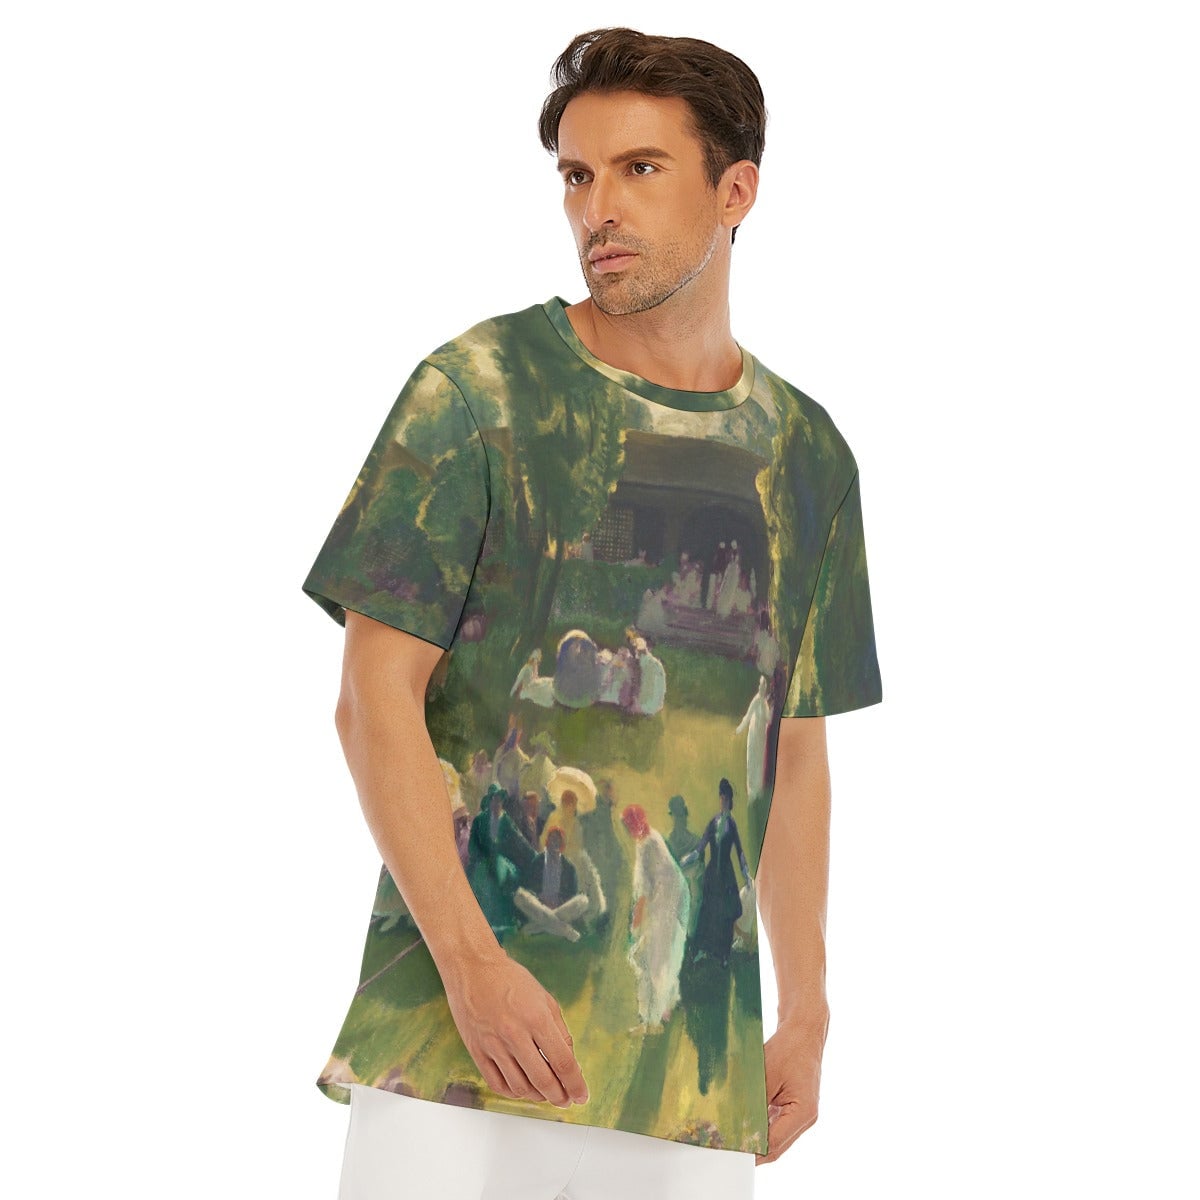 Tennis at Newport by George Bellows T-Shirt - Artistic Tee